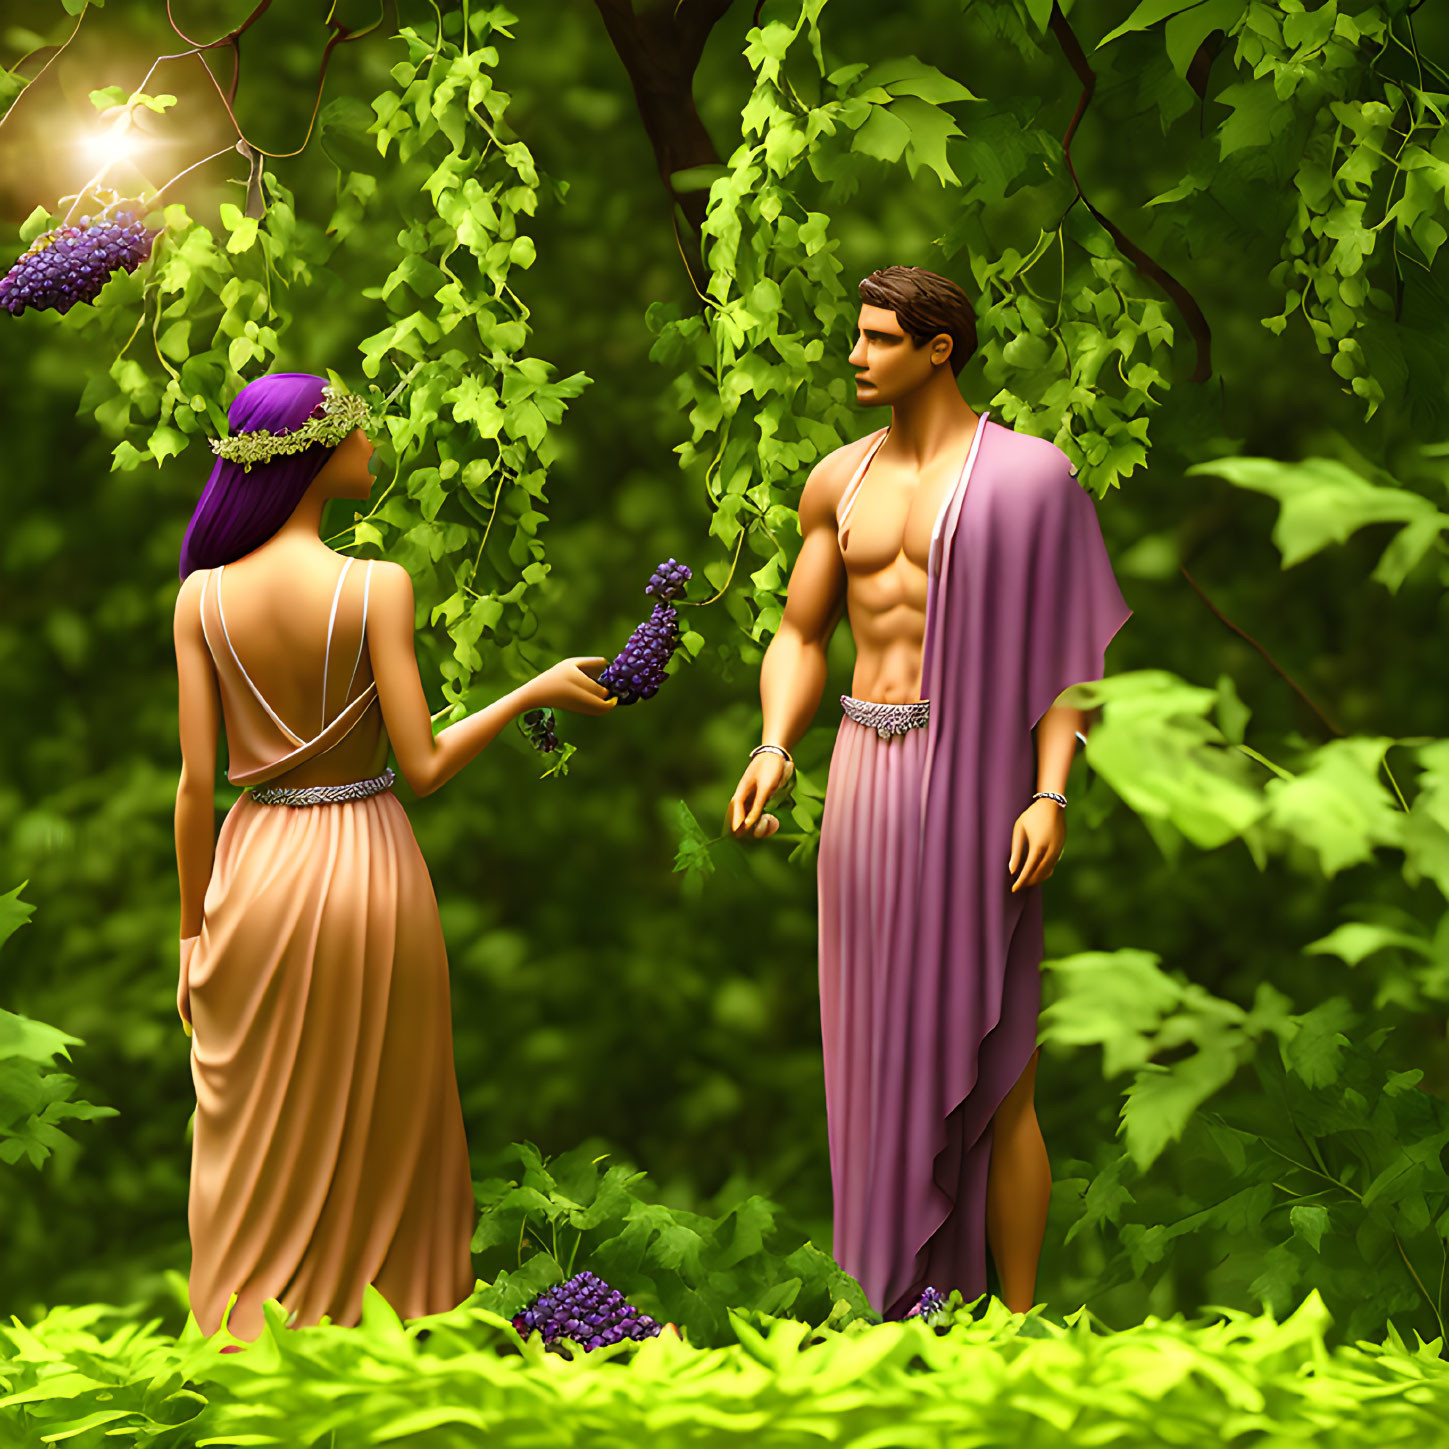 Woman in beige dress offers grapes to man in purple toga among green vines